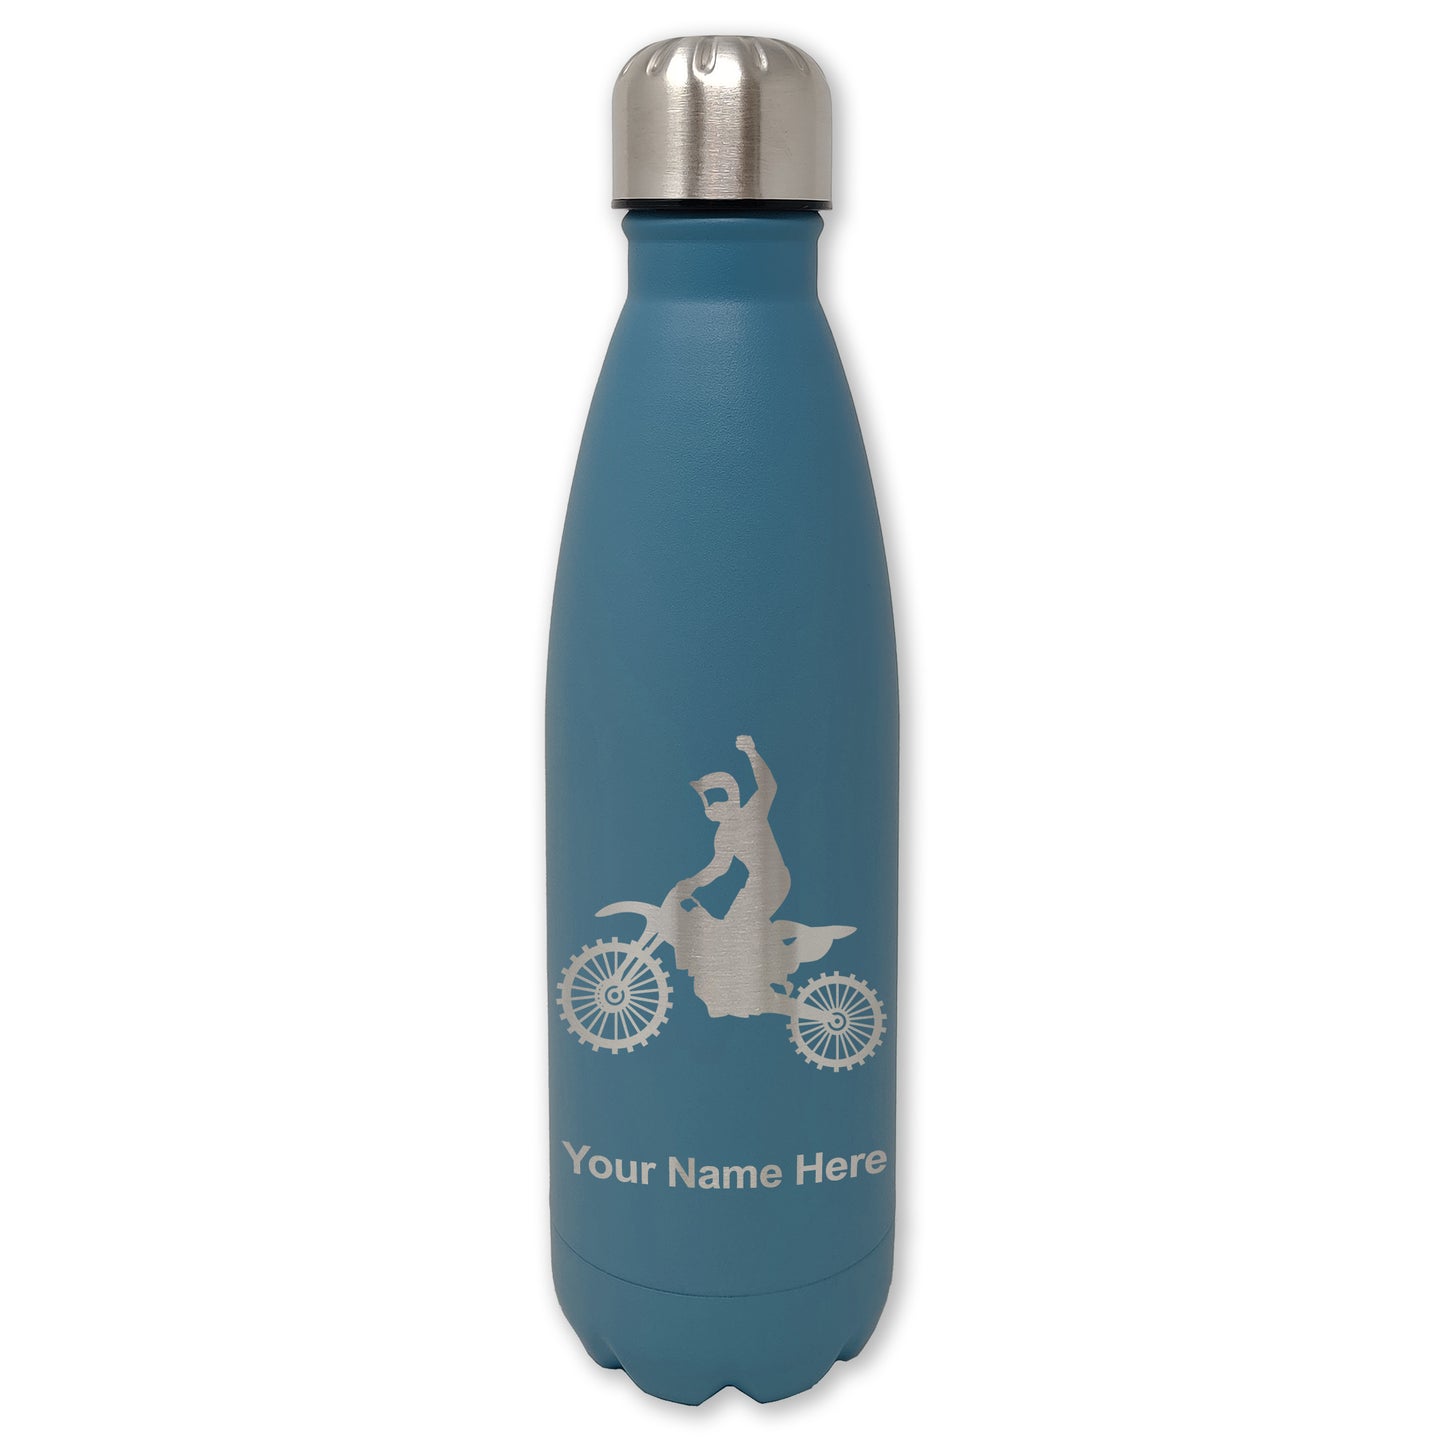 LaserGram Double Wall Water Bottle, Motocross, Personalized Engraving Included